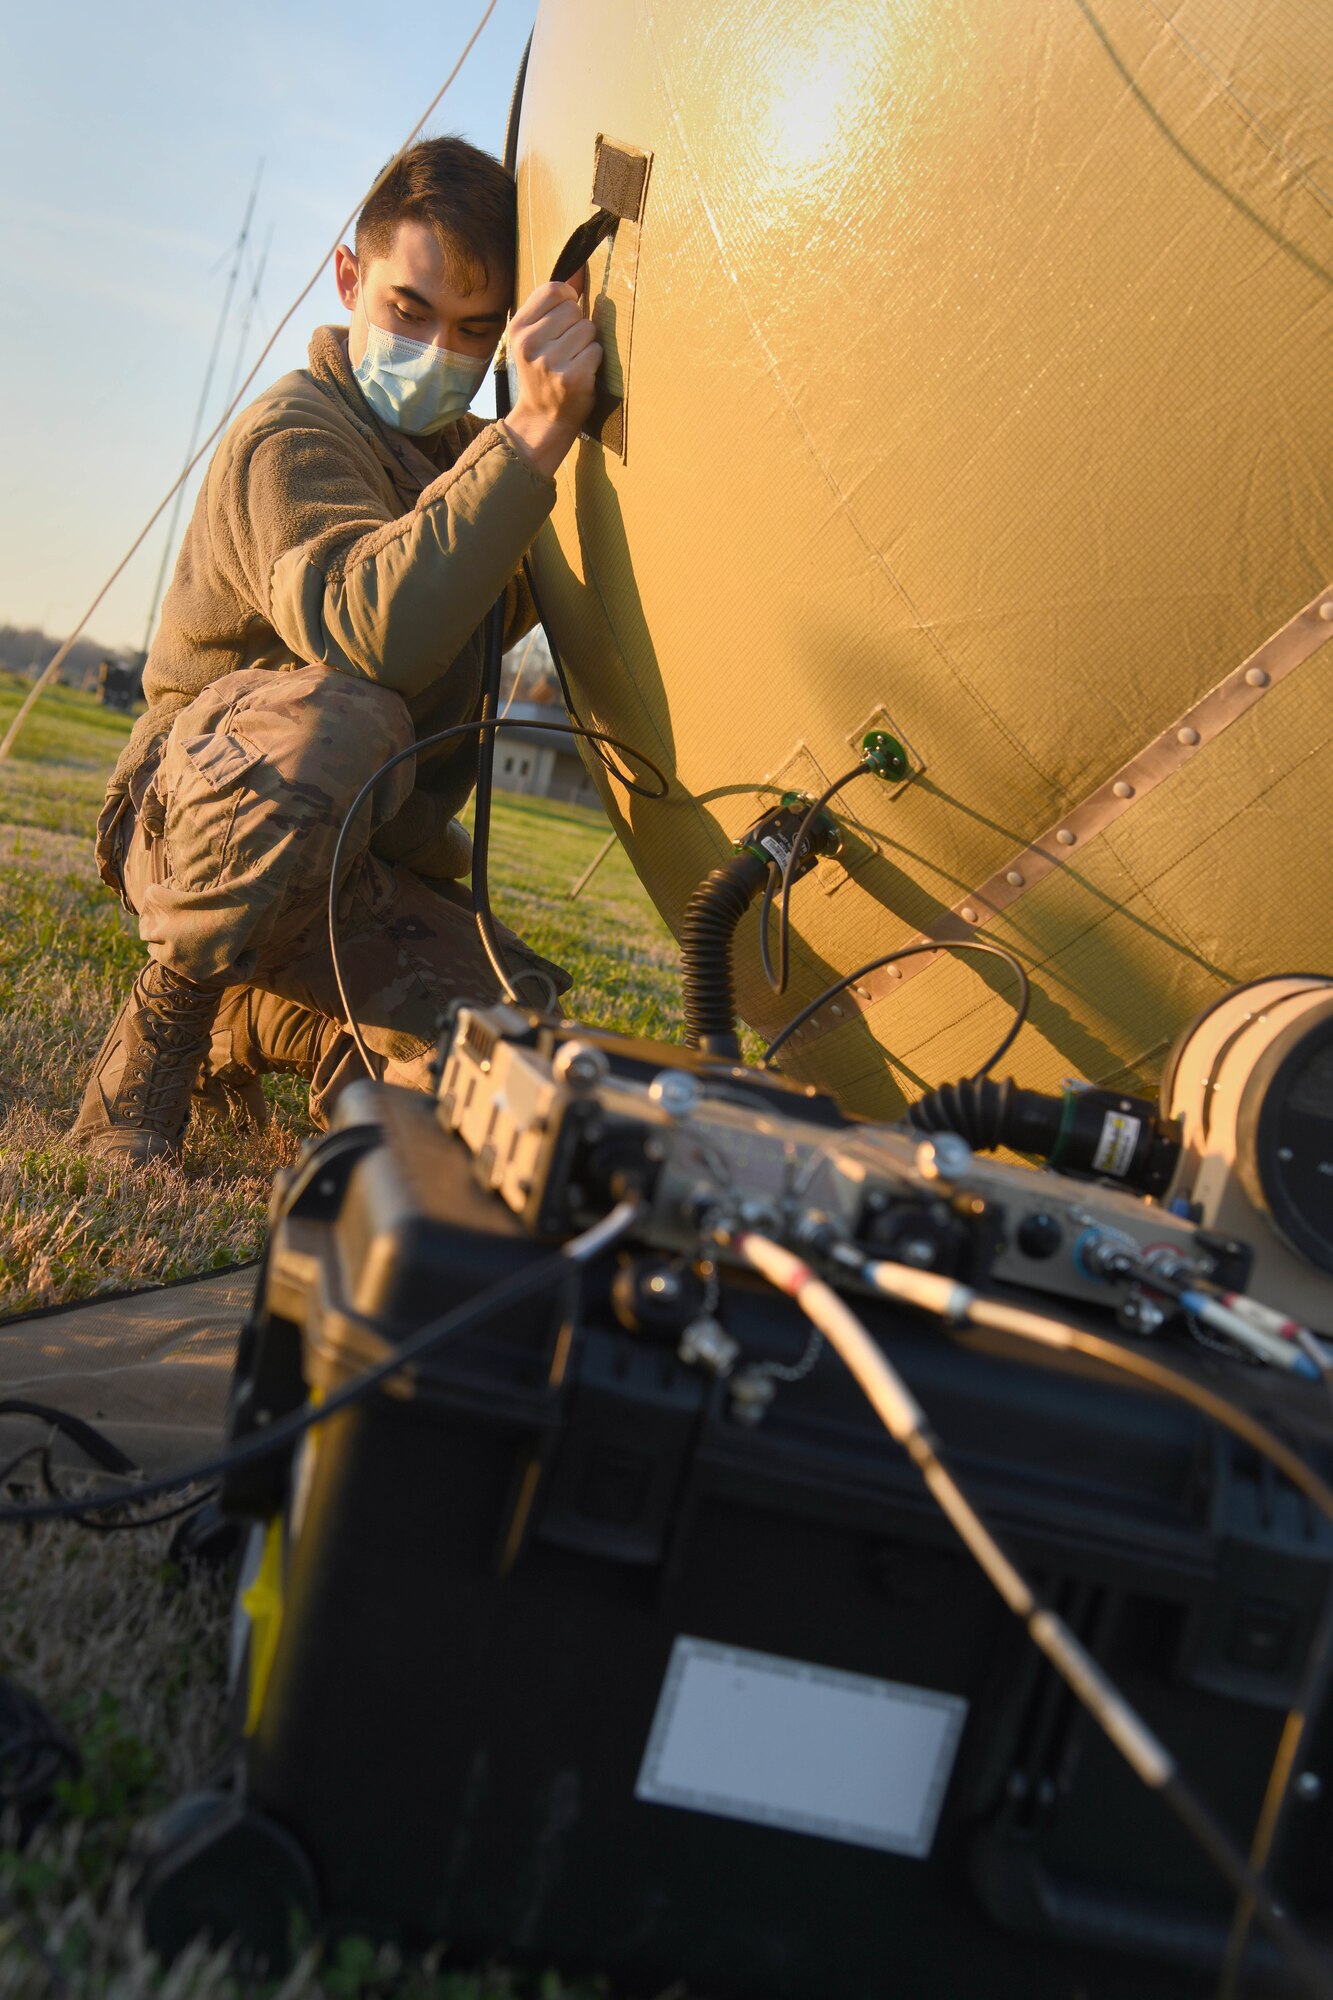 U.S. Air Force Staff Sgt. Frederick Van Riper, 621st Contingency Response Support Squadron mobile command, control, communications and computers supervisor, sets up the satellite dish for the small communications package Feb. 1, 2021, at the Alexandria International Airport, Louisiana. Airmen were able to employ new tent systems and a small communications package during a Joint Readiness Training Center exercise Jan. 31-Feb. 9 in Louisiana. (U.S. Air Force photo by Master Sgt. Melissa B. White)